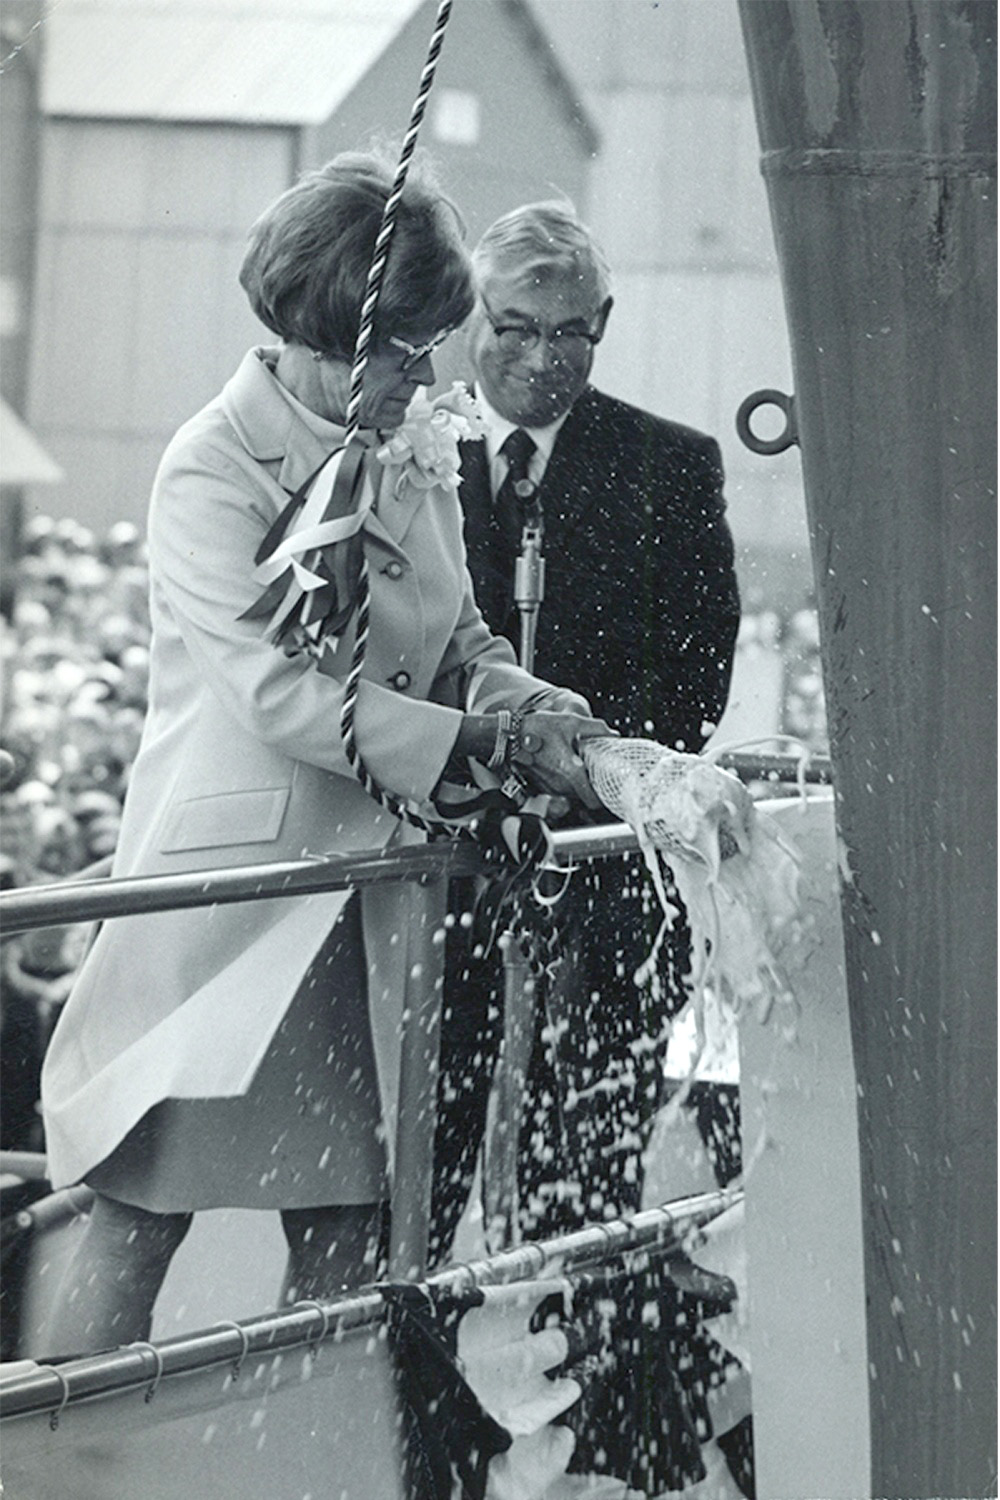 A U.S. navy file photo of Catherine Nimitz Lay, daughter of Fleet Adm. Chester W. Nimitz, breaking a bottle of champagne to christen the aircraft carrier USS Nimitz (CVN 68), May 13, 1972. -